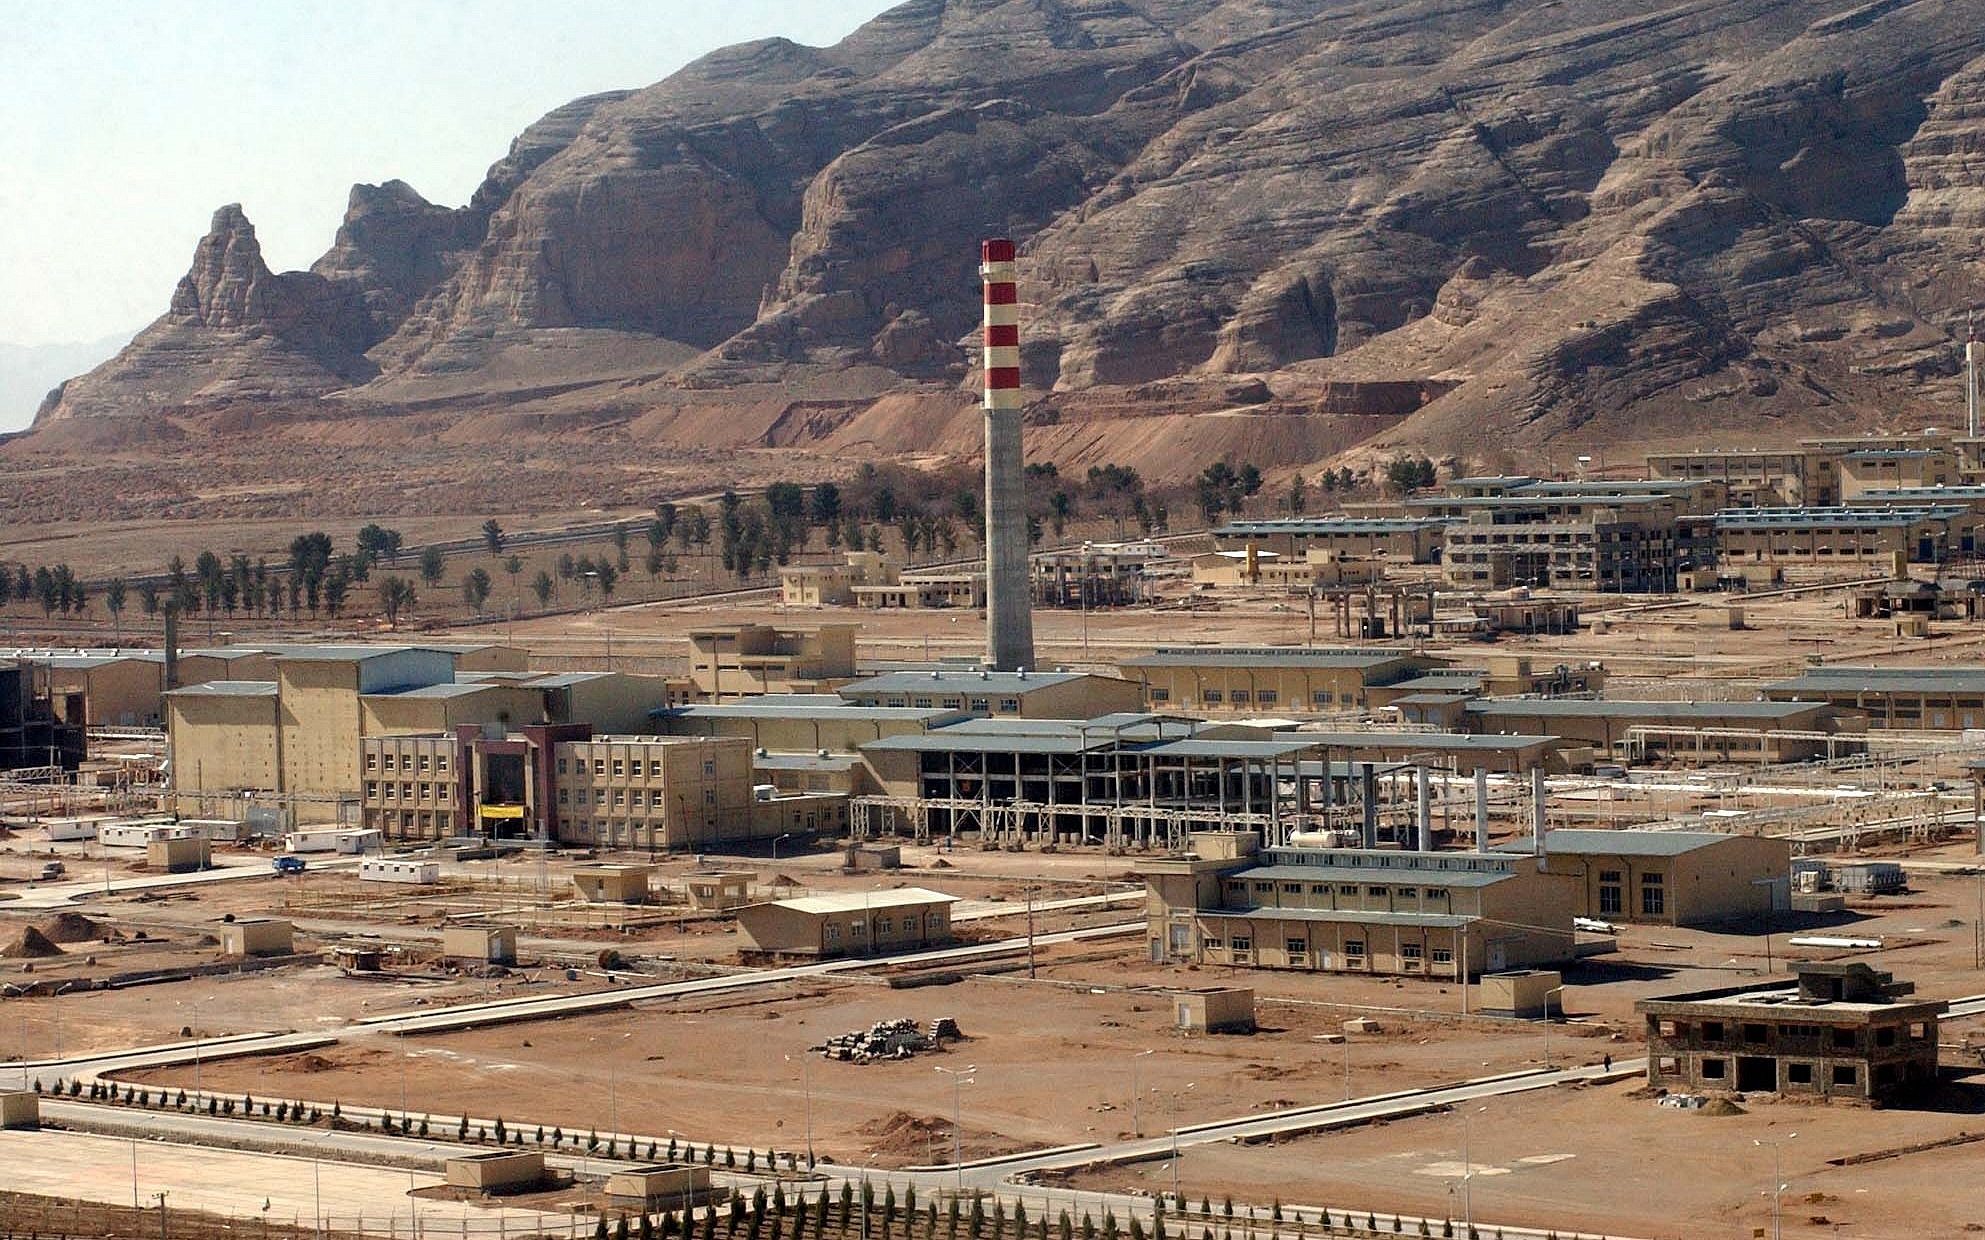 Iran could enrich enough uranium for nuke in 6-8 months, says former